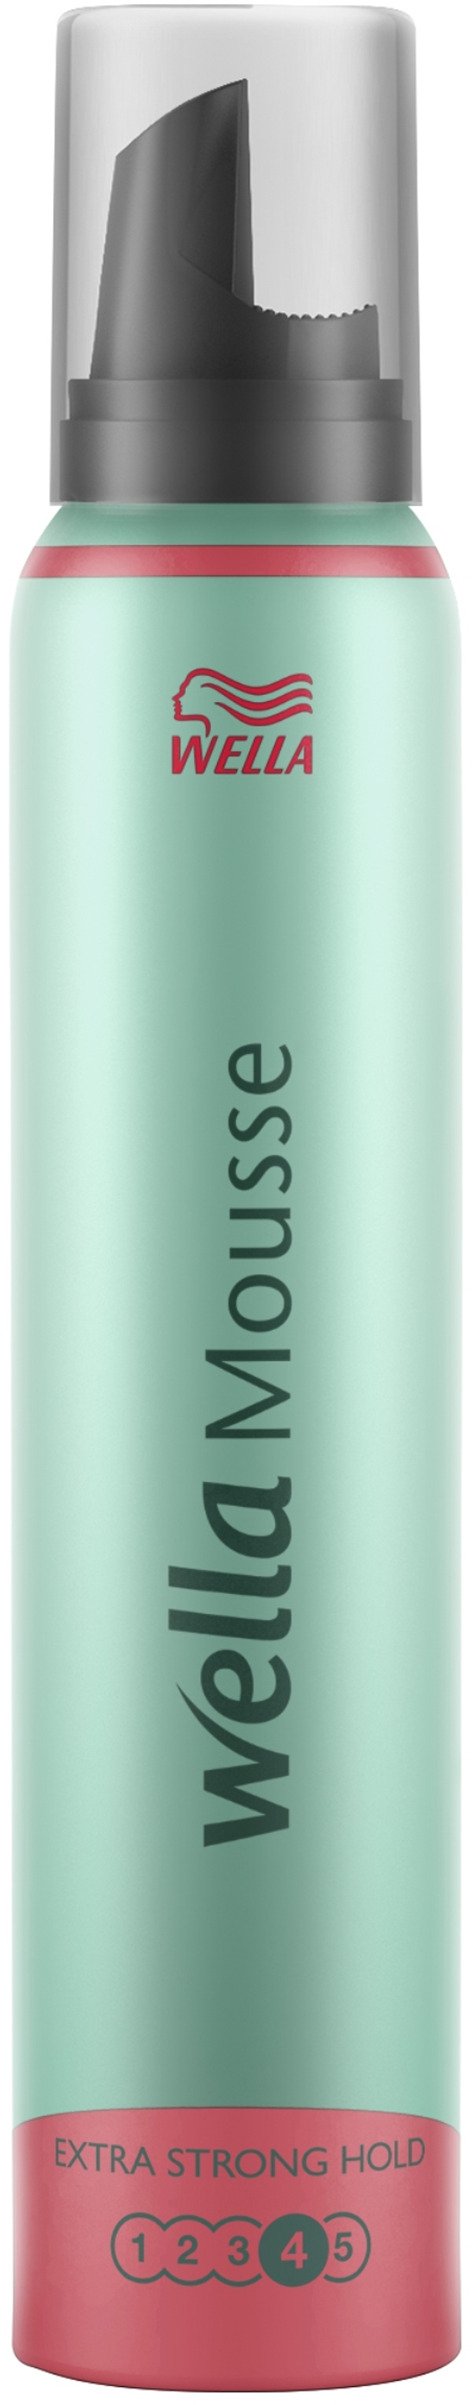 Wella Styling Mousse Extra Strong 200ml